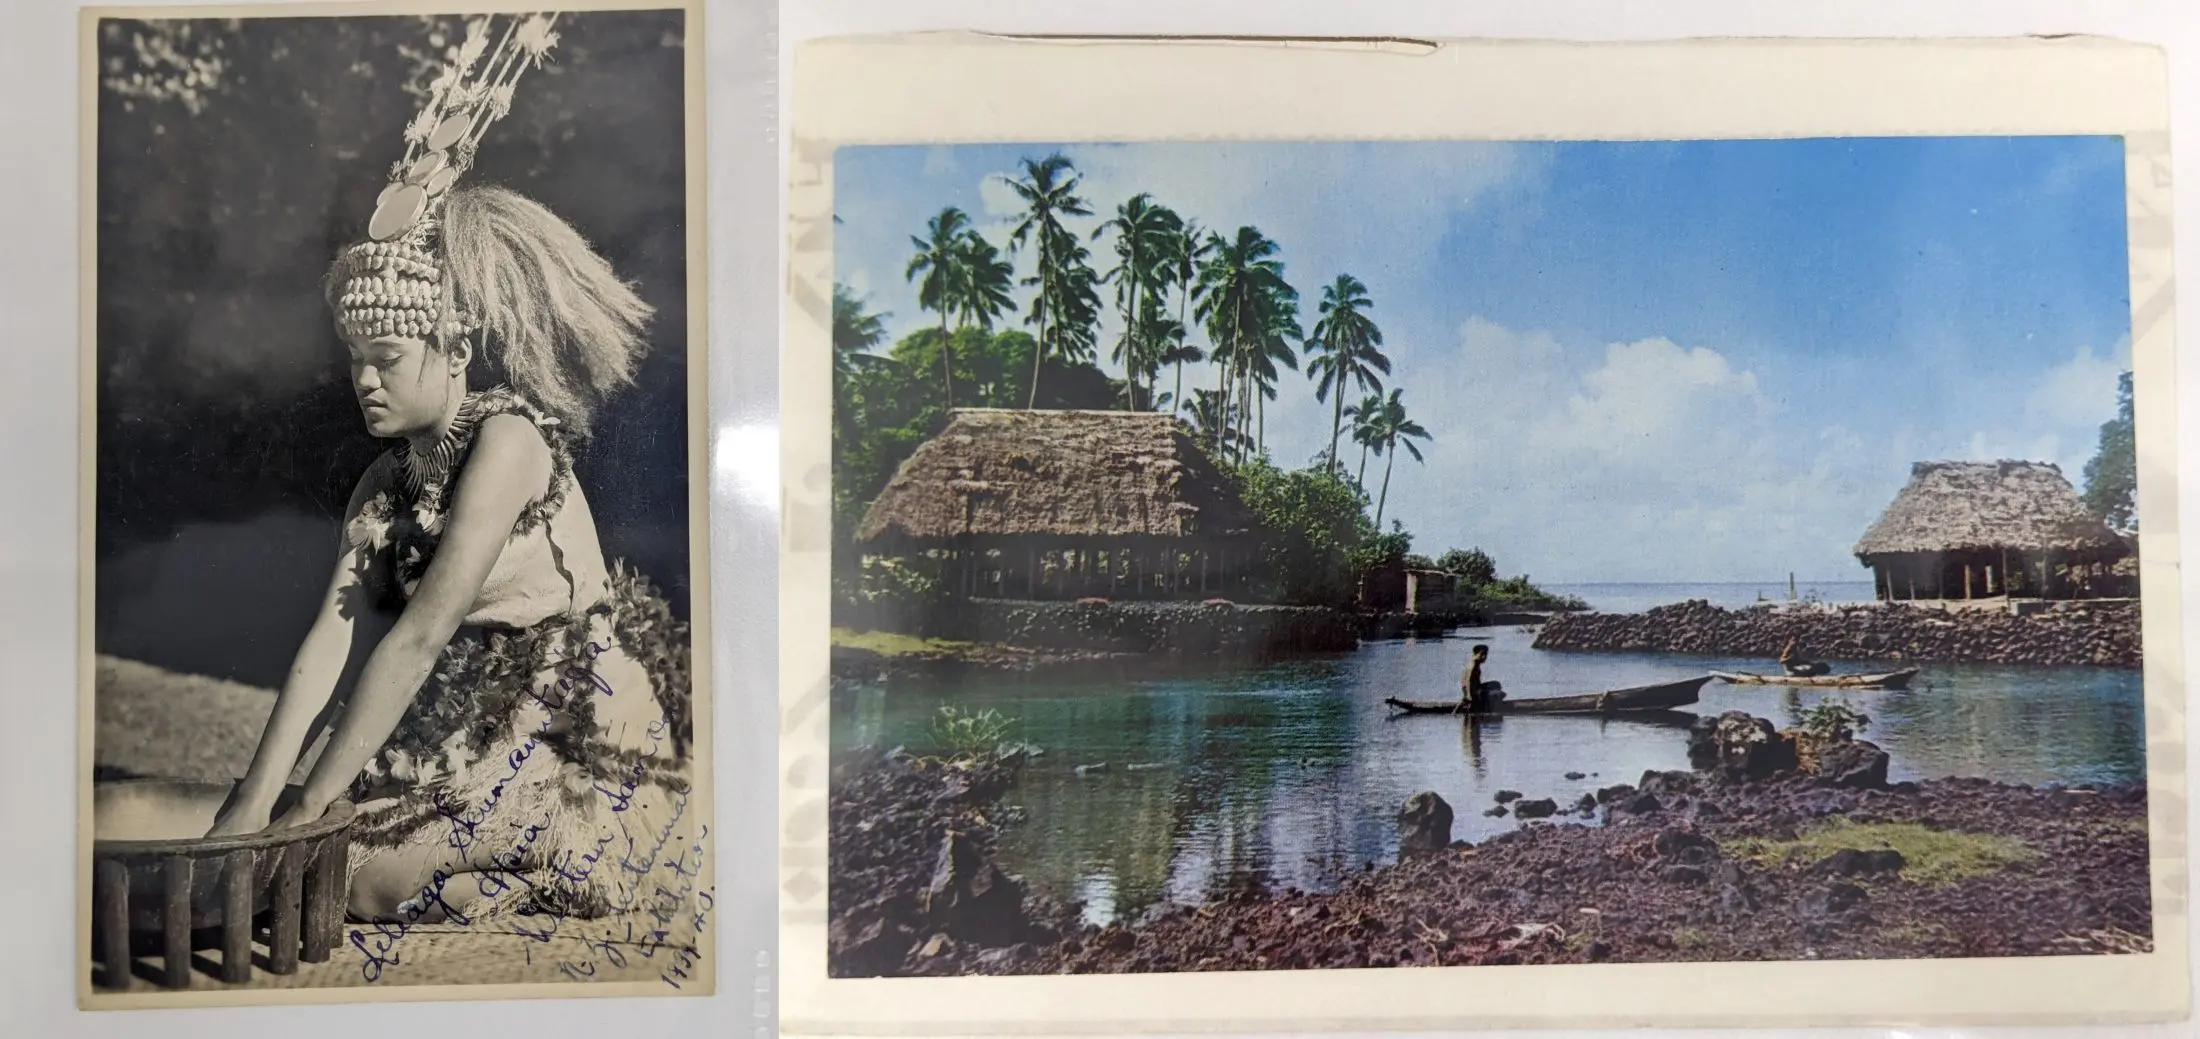 Two side by side images of postcards, one black and white showing a young woman in traditional dress with her hands inside a ceremonial bowl, and a colourful image of a seaside village with man in a boat and thatched huts with palm trees. 